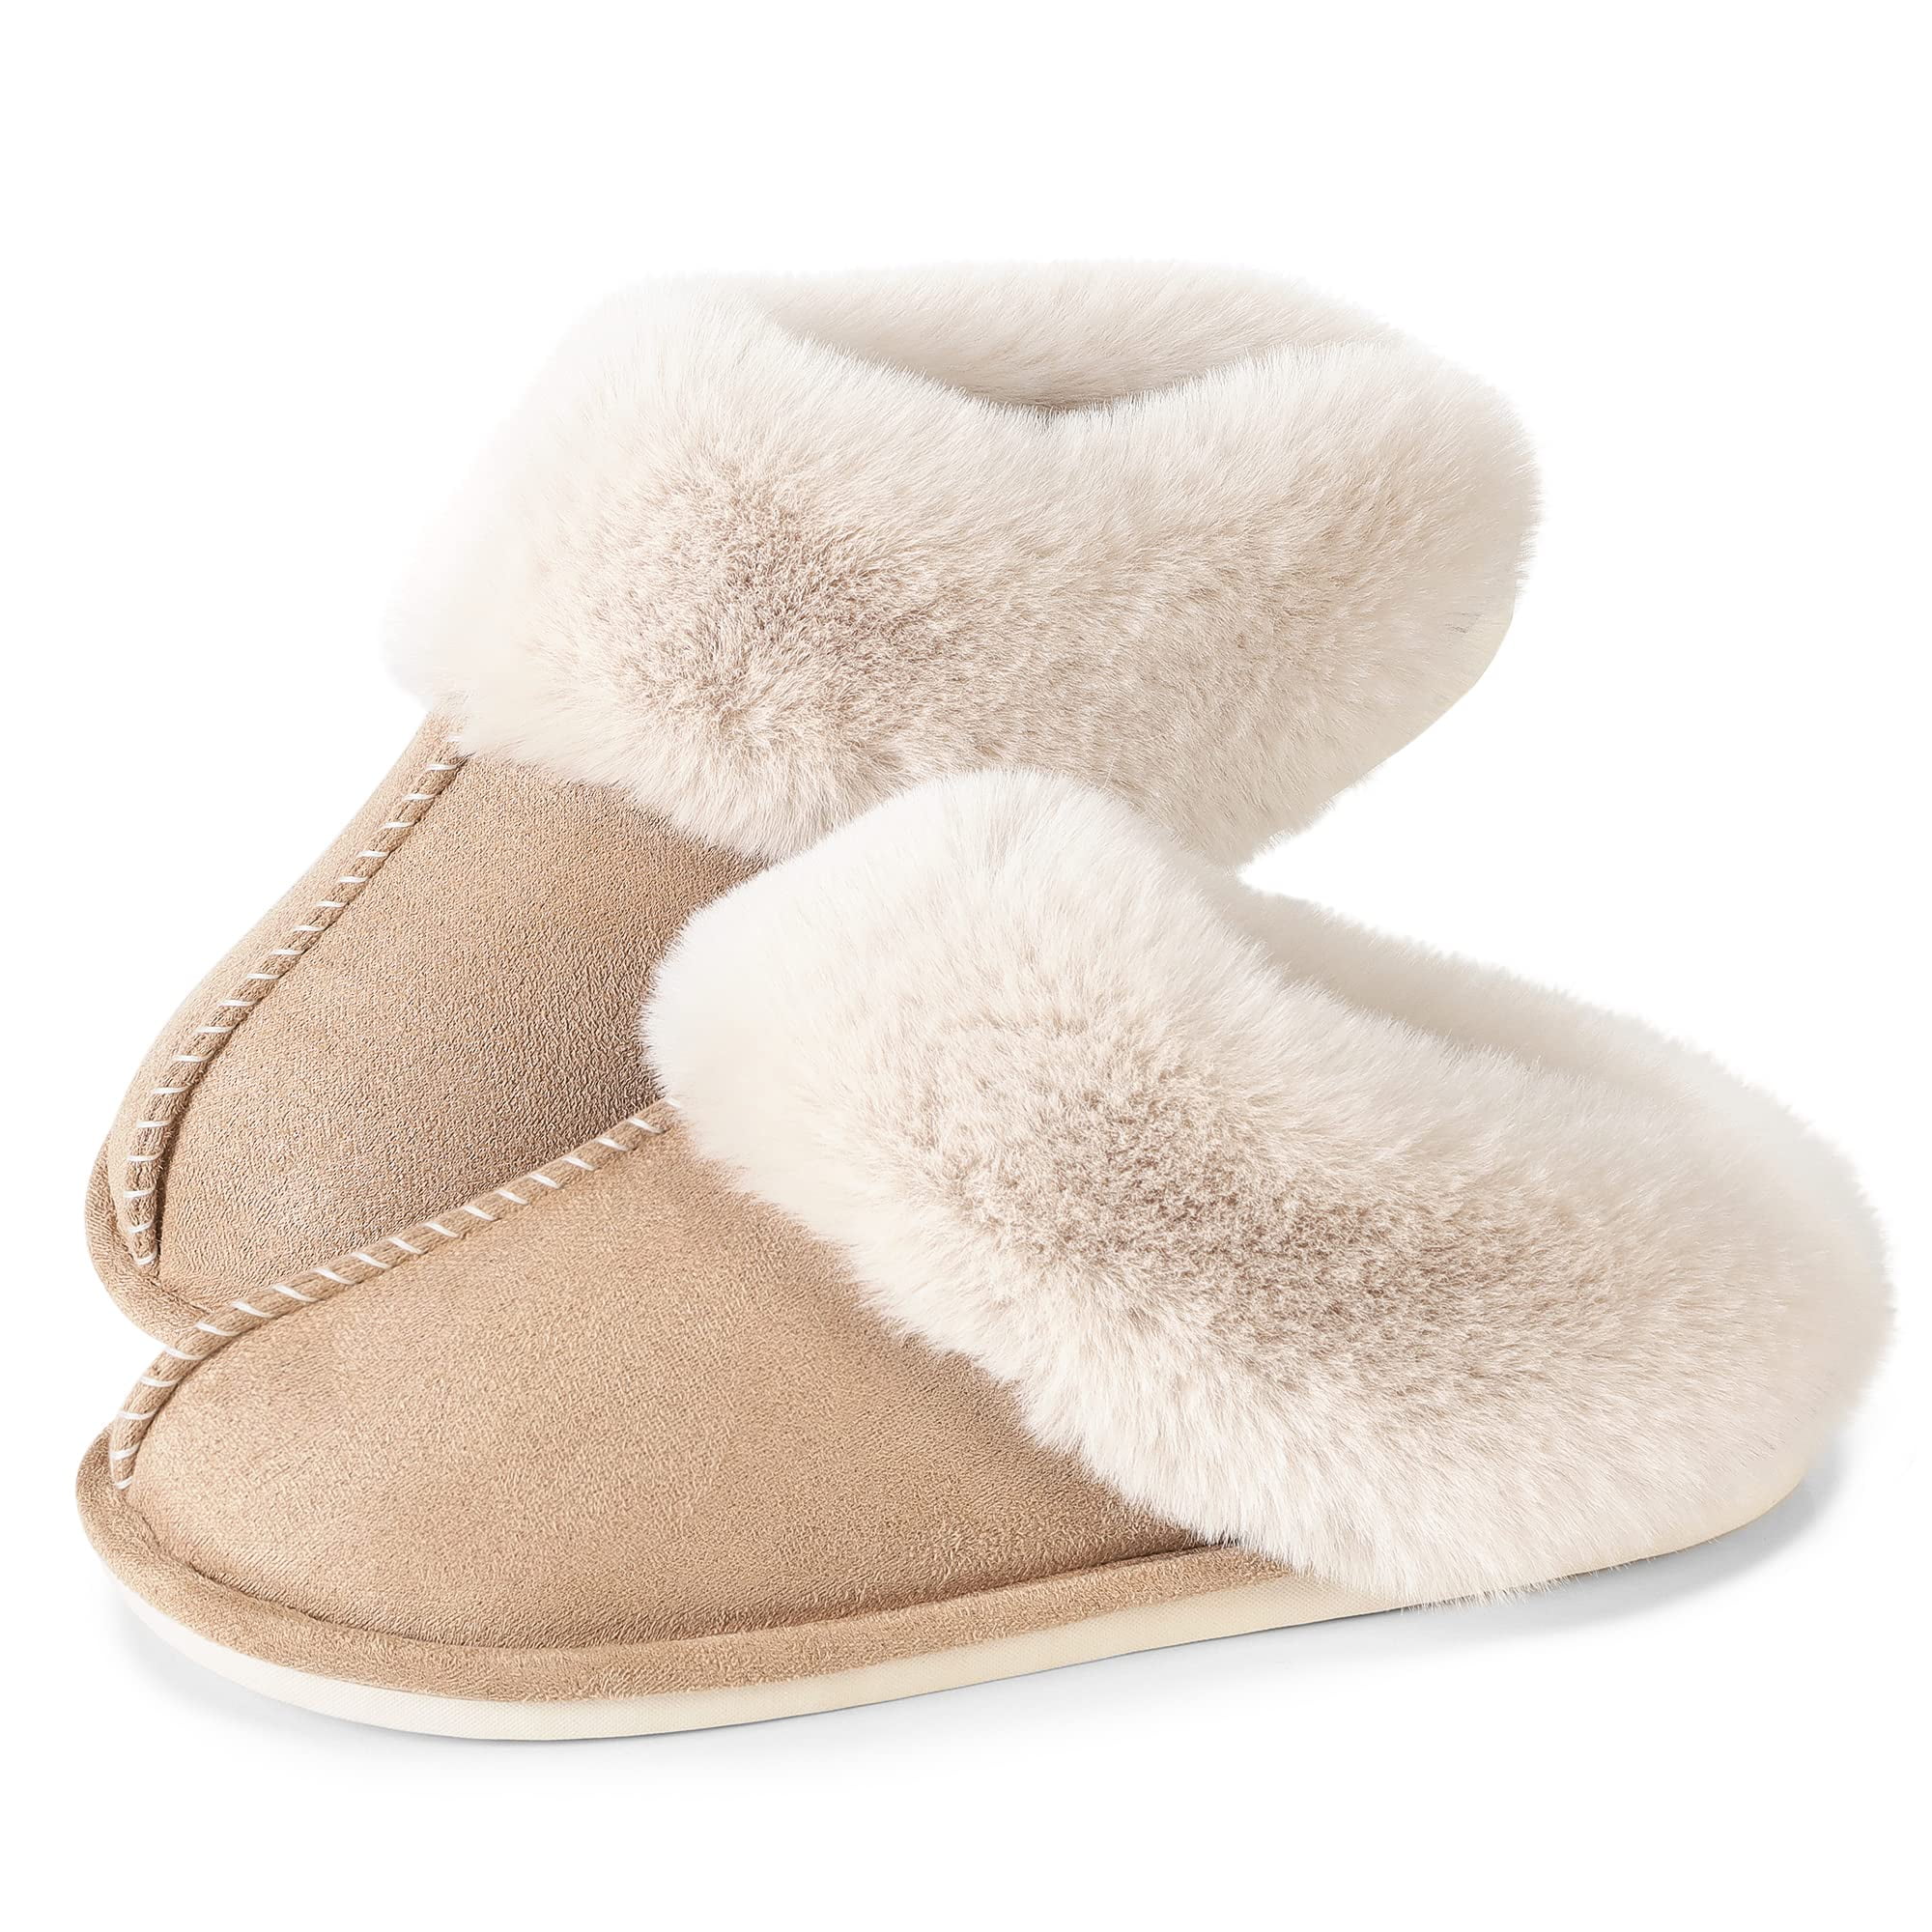 Cozy Thickened Warm Plush House Slippers，Women's Indoor Soft Bottom  Anti-Skid Comfortable Cotton Sli…See more Cozy Thickened Warm Plush House